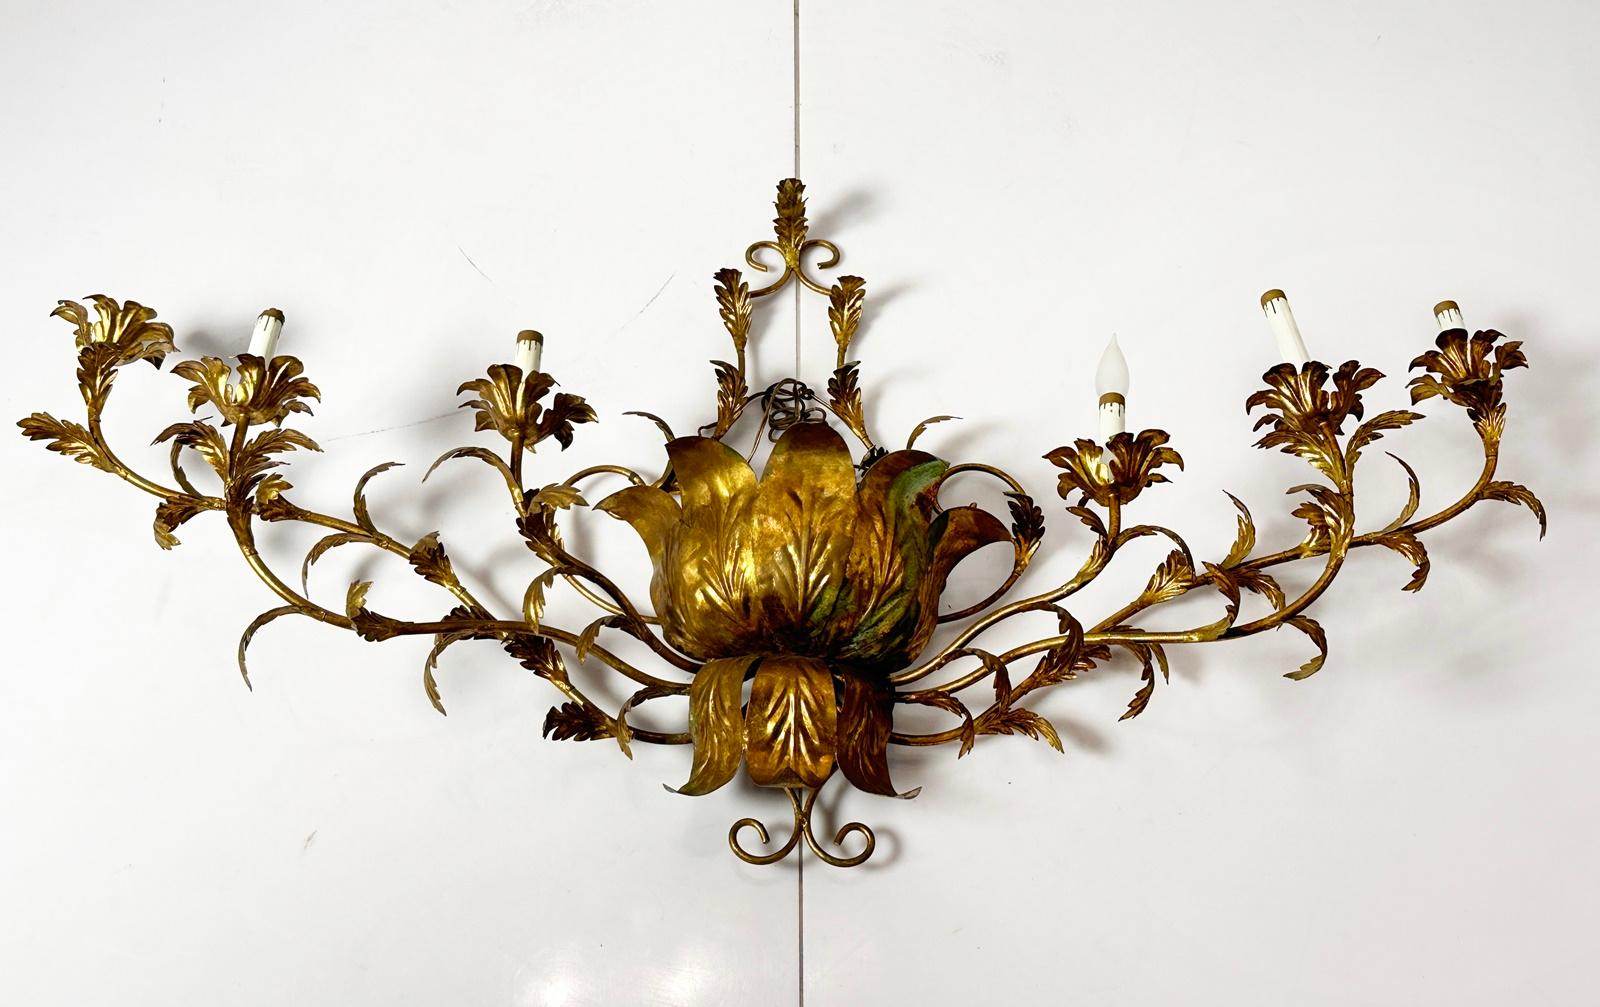 Introducing our exquisite Six-Light Italian Gilt Tole Metal Sconce, a true testament to elegance and craftsmanship. Hailing from the esteemed design era of 1970's Italy, this wall-mounted chandelier exudes opulence and sophistication. 

Featuring a